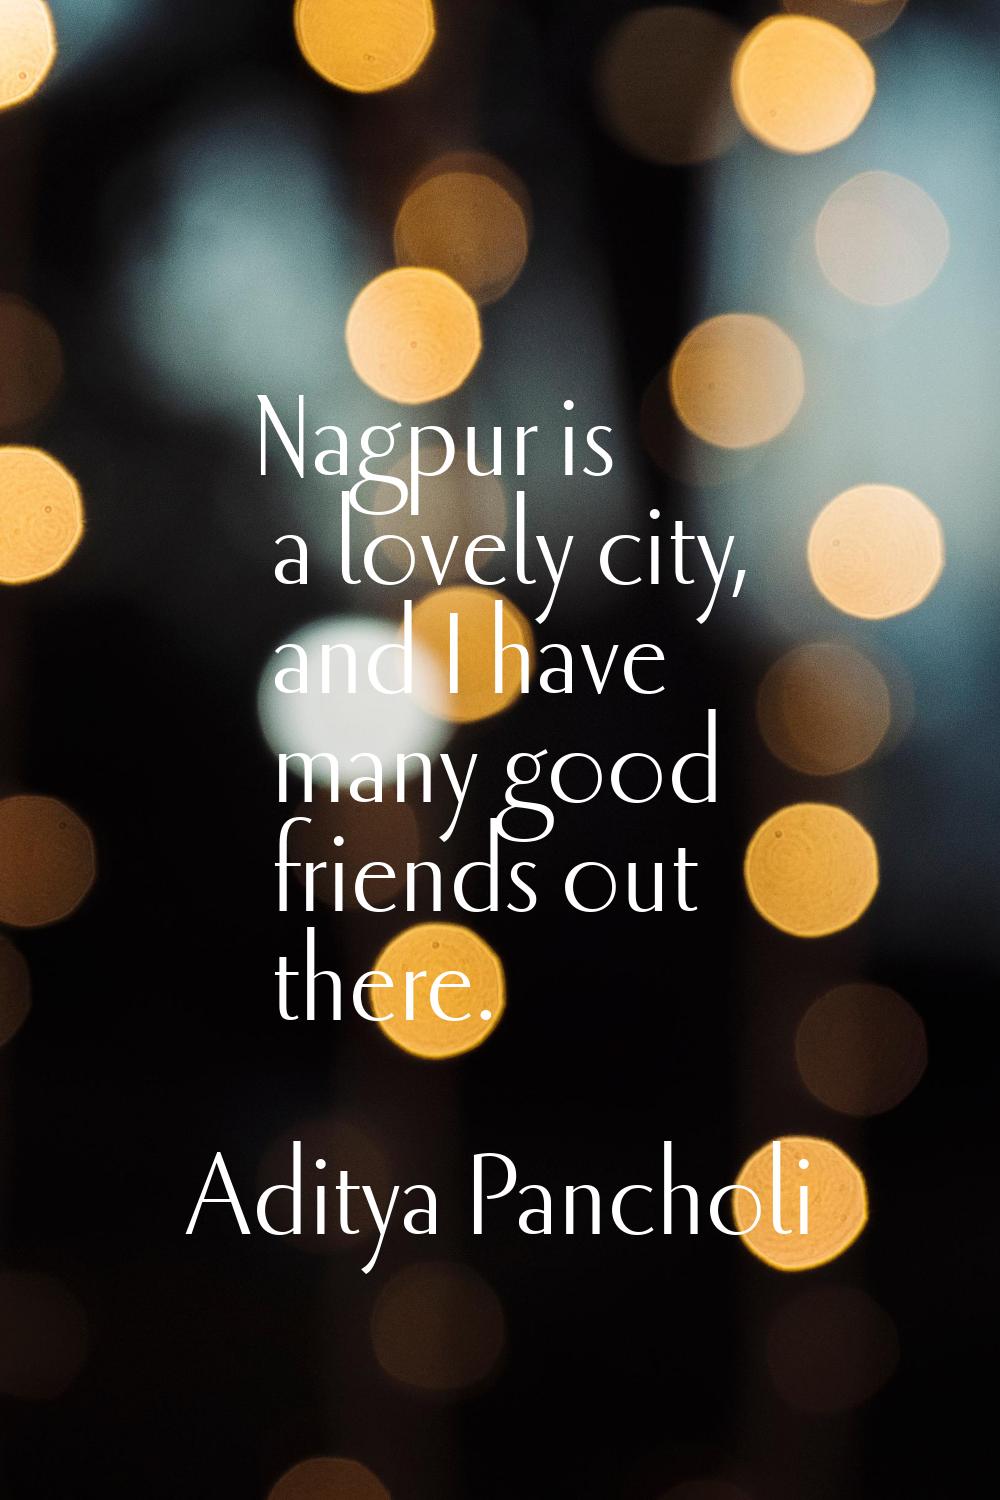 Nagpur is a lovely city, and I have many good friends out there.